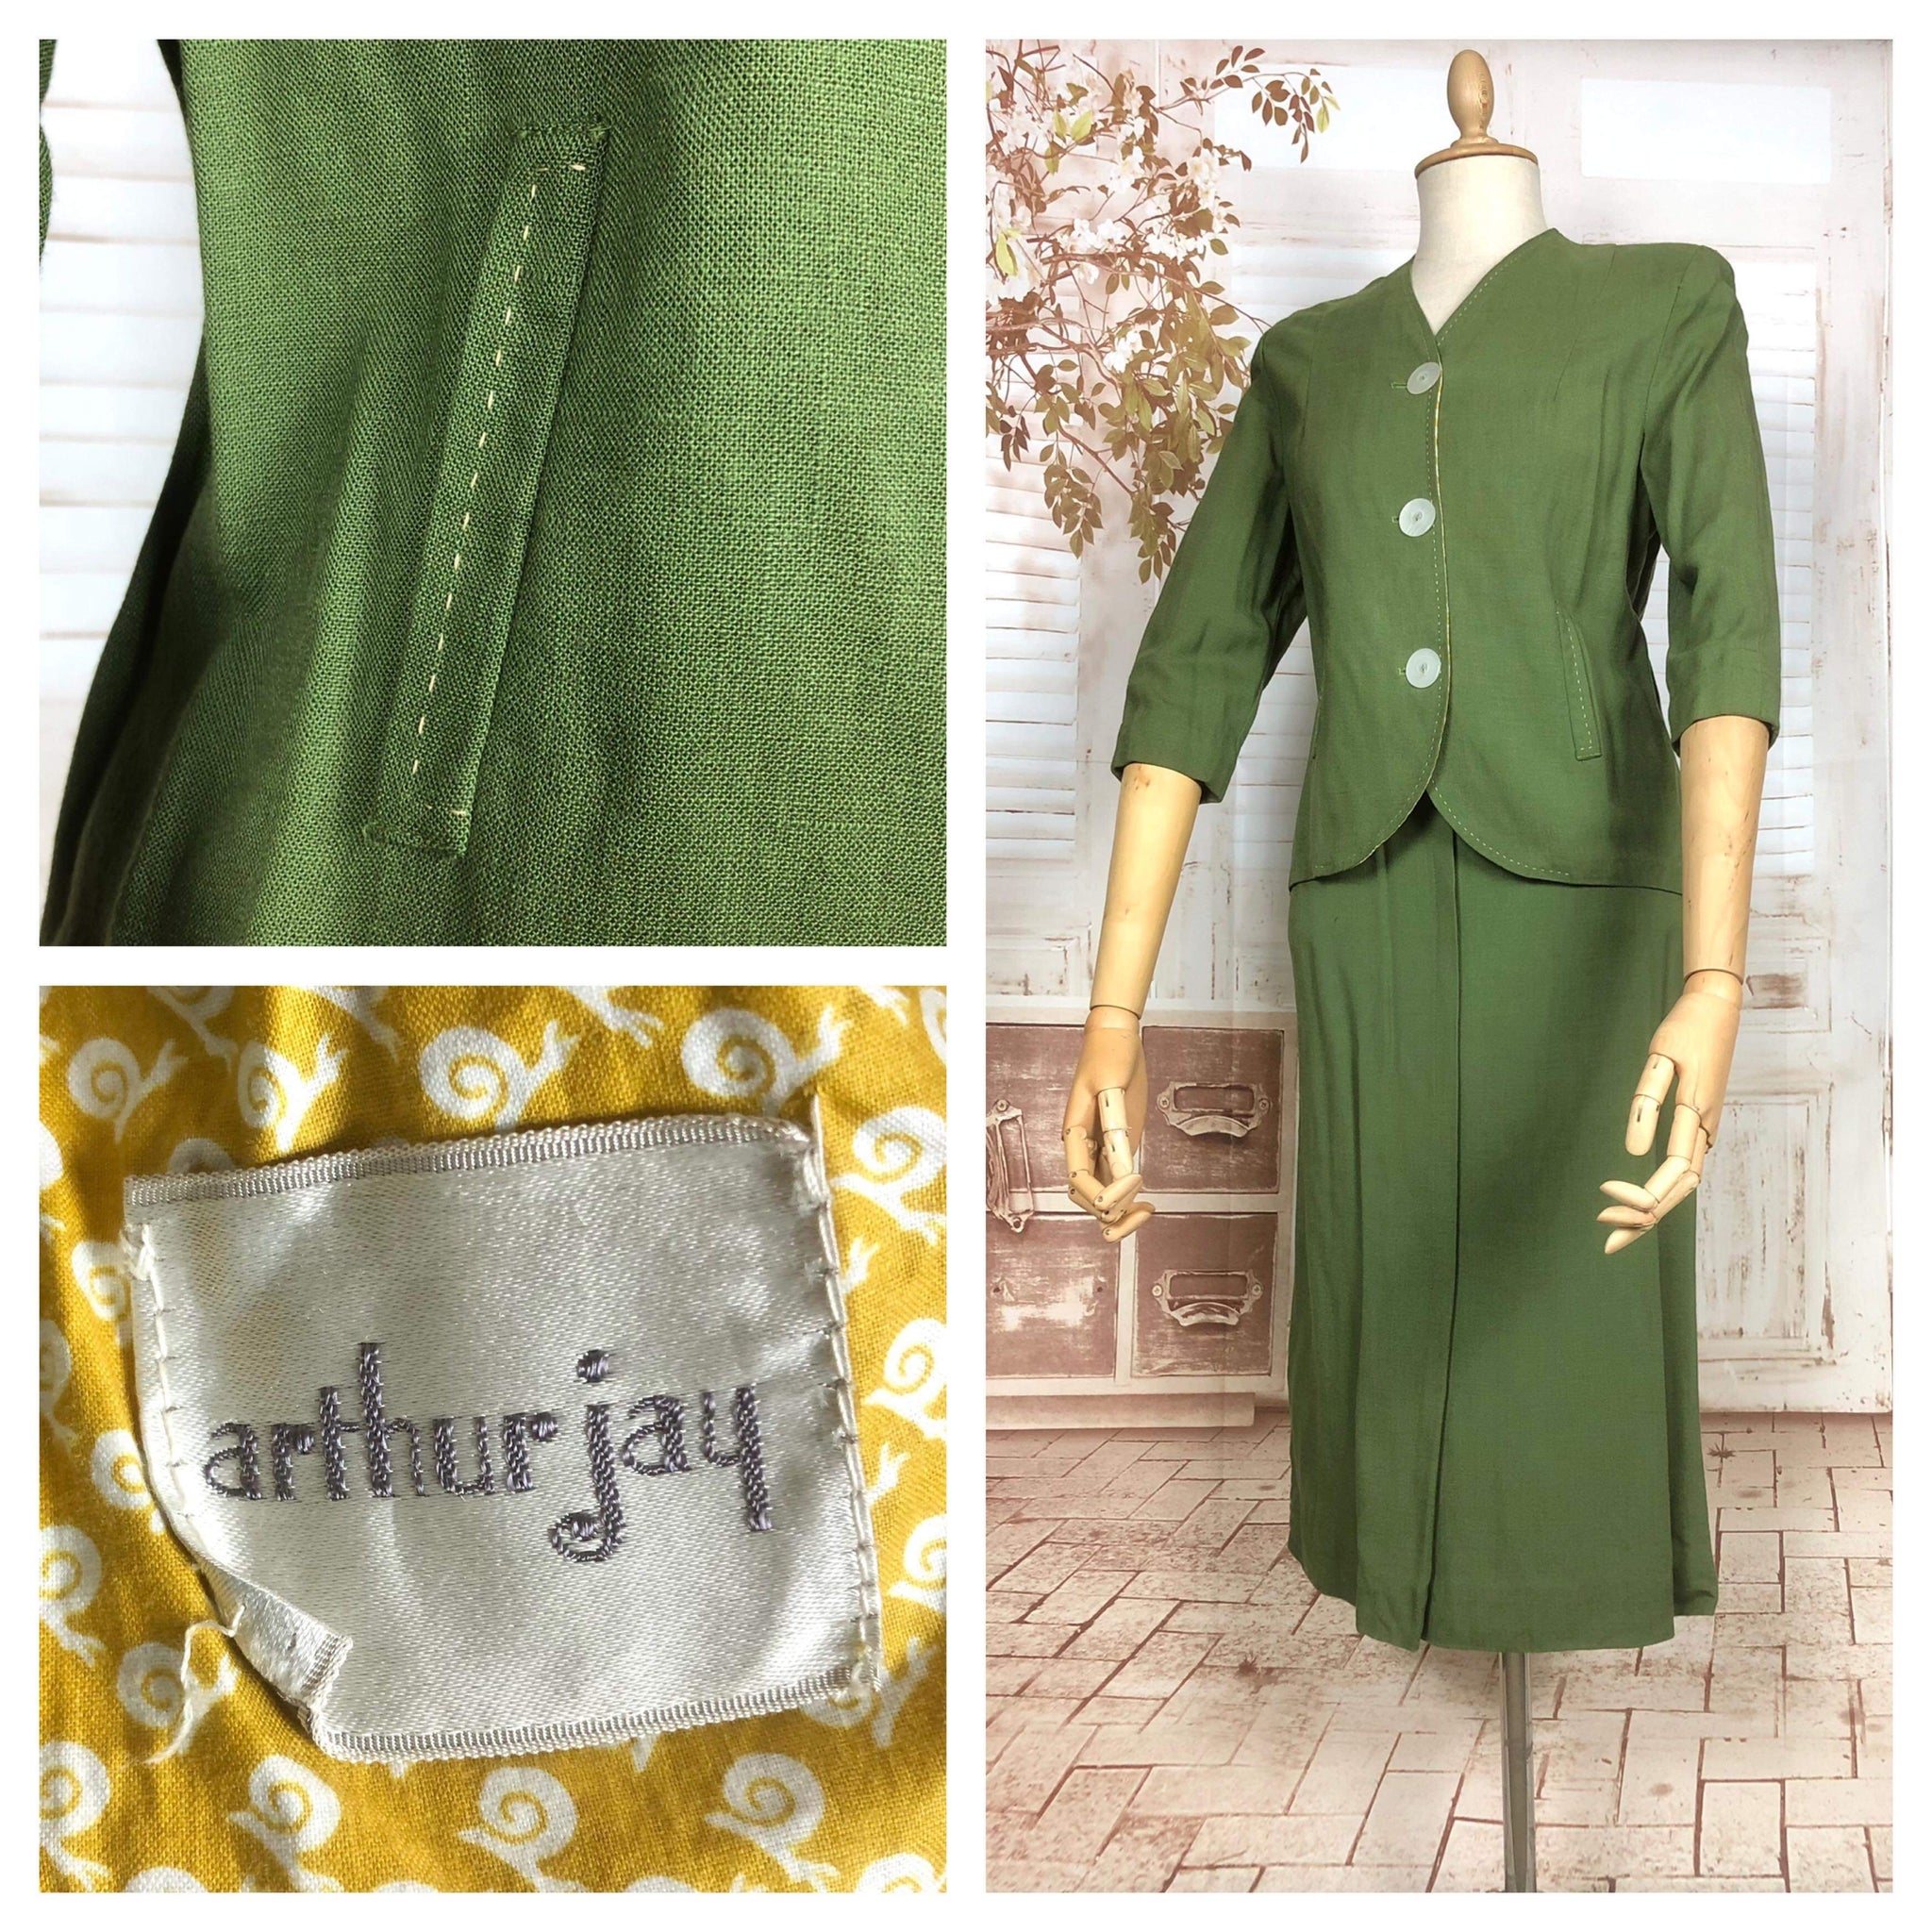 Stunning Original Late 1940s / Early 1950s Vintage Spring Green Skirt Suit By Arthur Jay